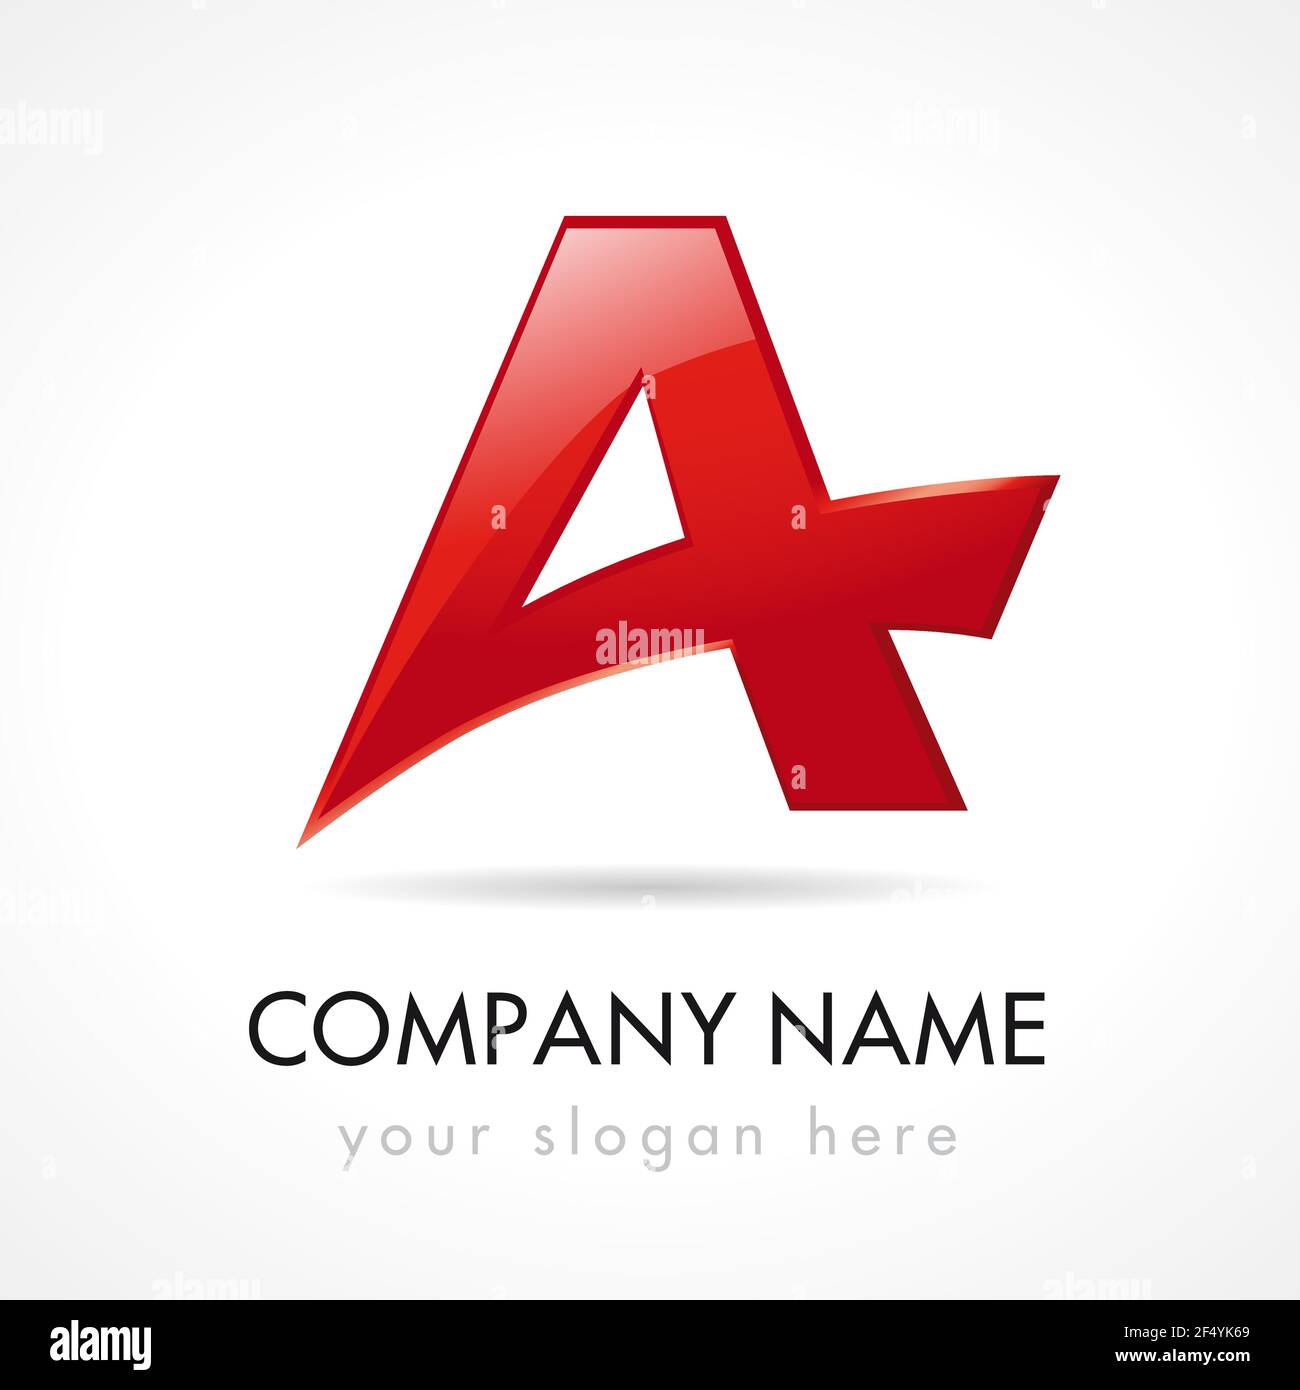 A letter logotype. A company. Traveling, logistics, typographic font, trucking. Editable stained glass branding red template elements. Smartphone app Stock Vector